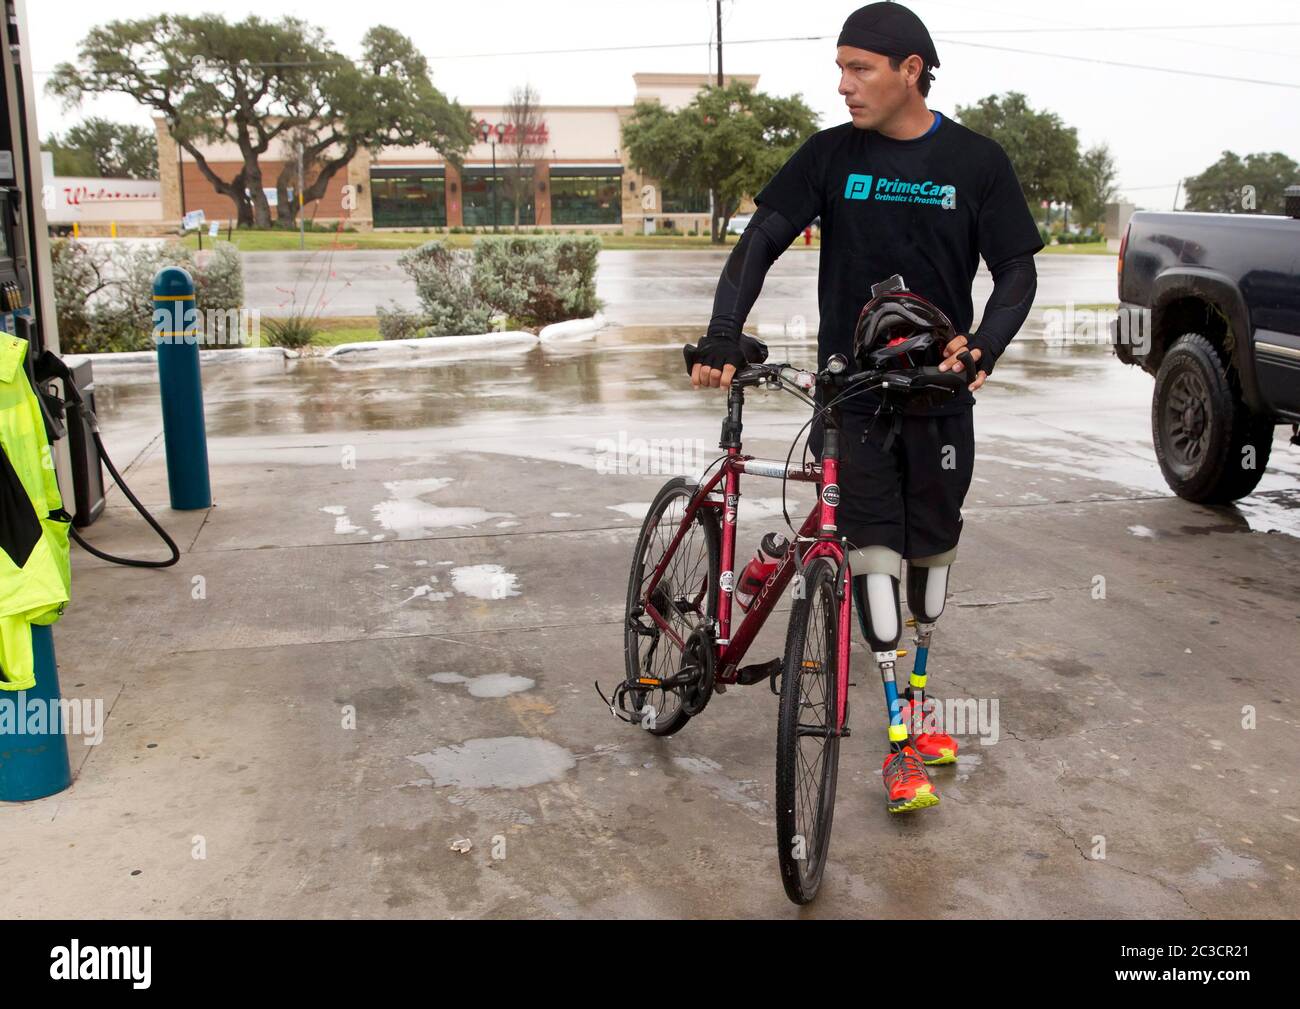 Carlos Gutierrez, a businessman from the northern state of Chihuahua in Mexico, had his feet chopped of by gangsters in his home country in 2011. He survived, fled his homeland, came with his family to the US and requested political asylum. As part of his therapy and to raise awareness about violence in Mexico, he is bike riding from El Paso, Texas to Austin. Carlos is a member of the El Paso-based nonprofit group 'Mexicans in Exile'.  ©Marjorie Kamys Cotera/Daemmrich Photography Stock Photo